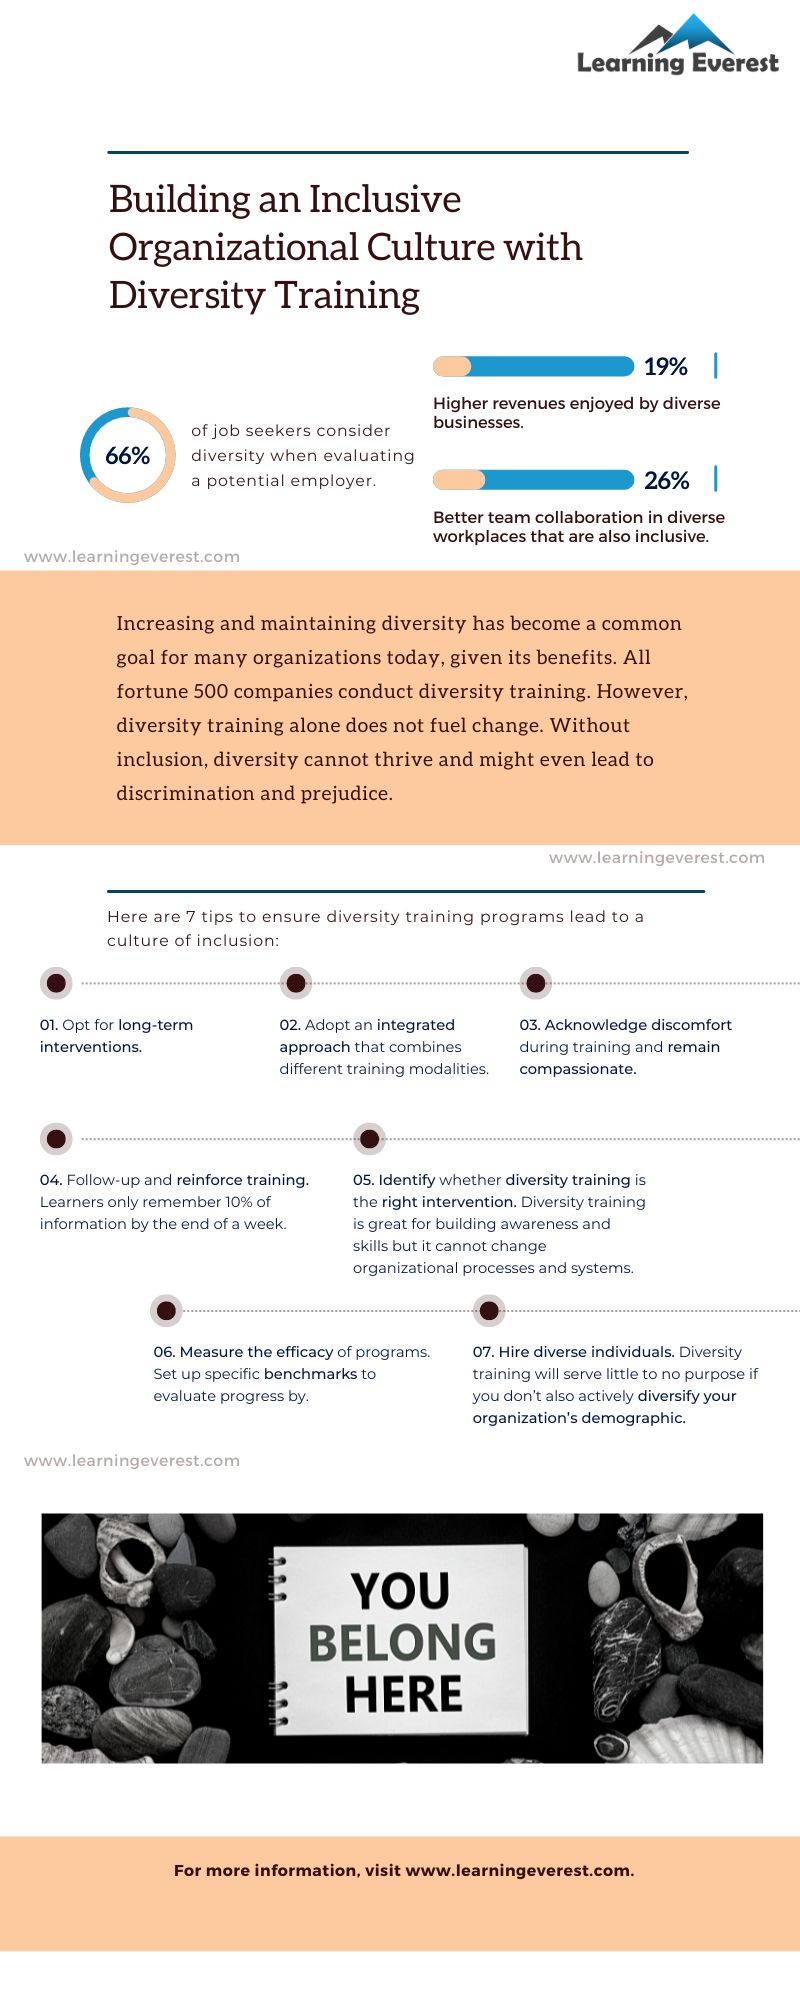 7 Tips to Build an Inclusive Organizational Culture Using Diversity Training Infographic